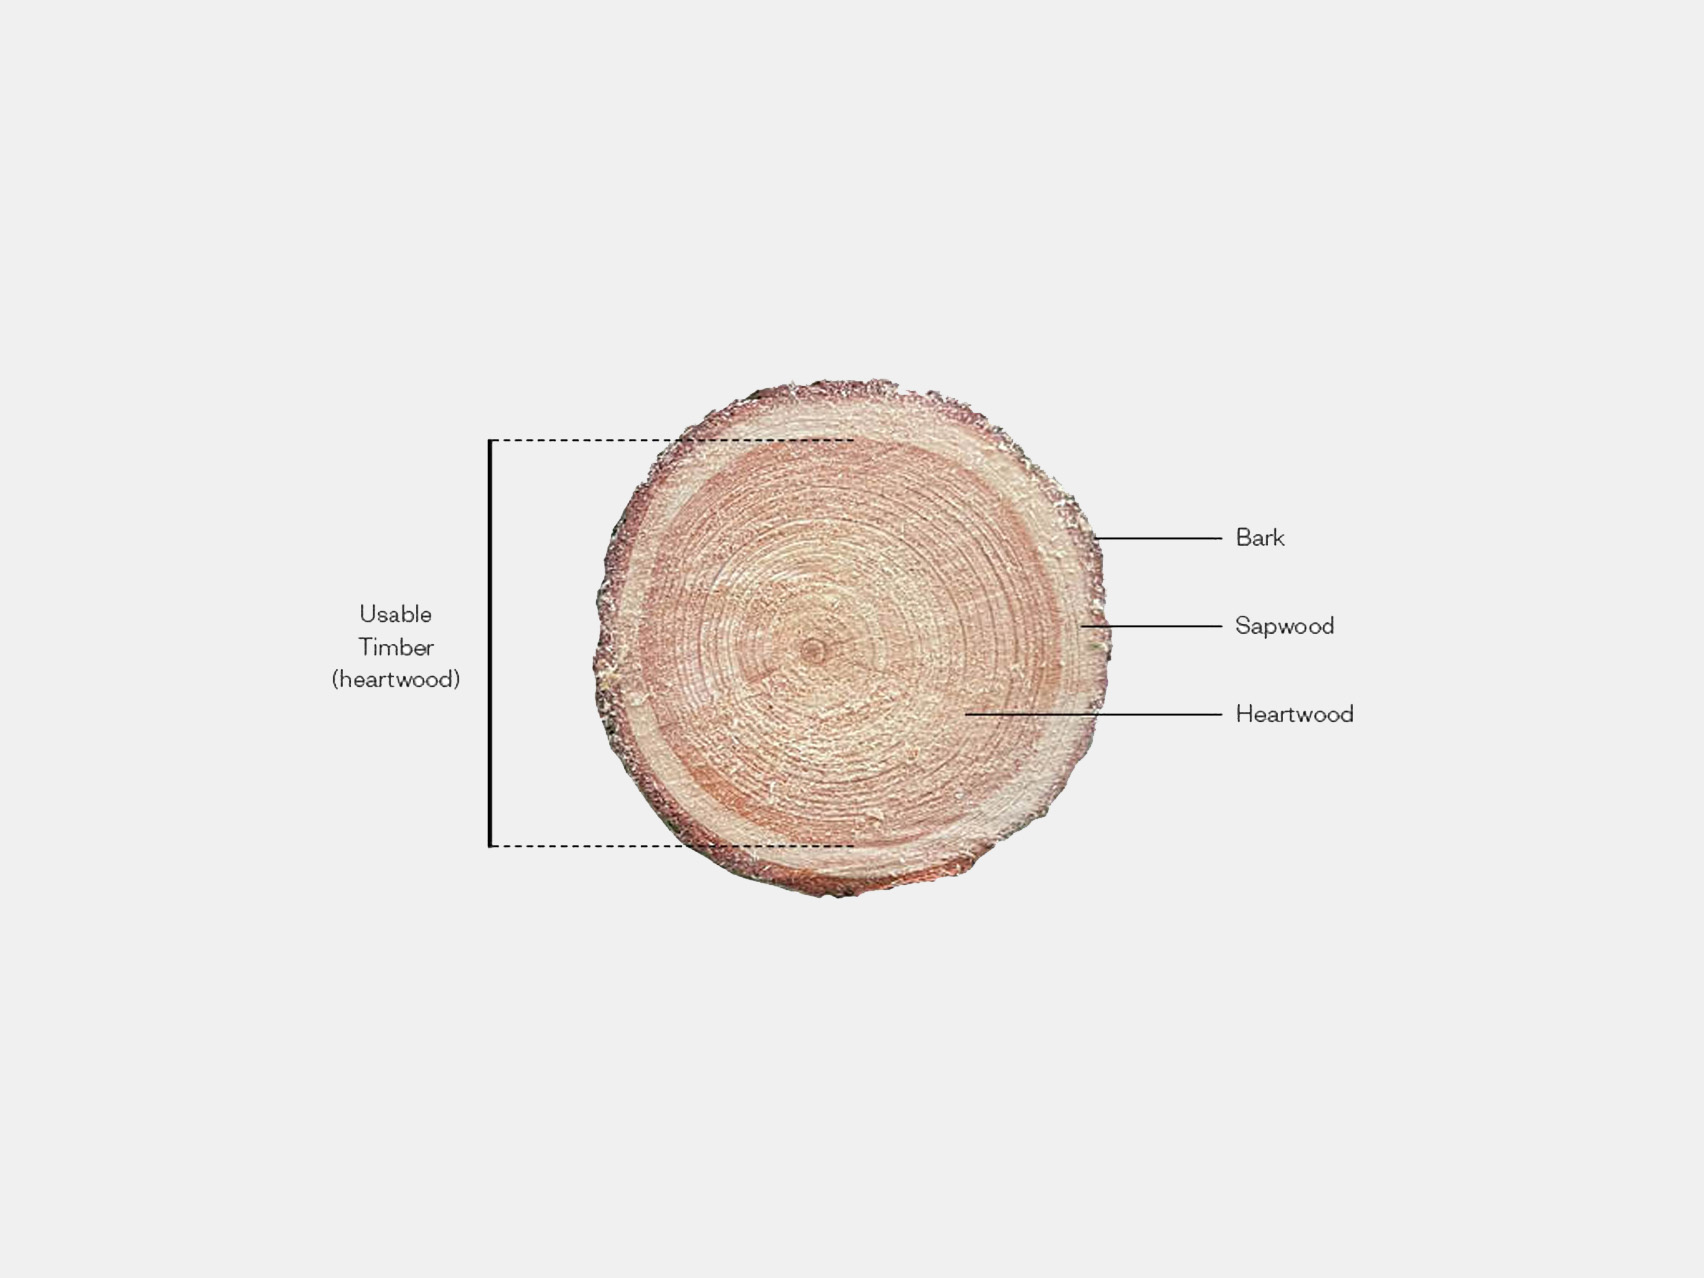 Diagram showing the different layers of timber within a cross-section of timber: heartwood taking up most of the circle from the middle, then a smaller ring of sapwood, then bark on the outside